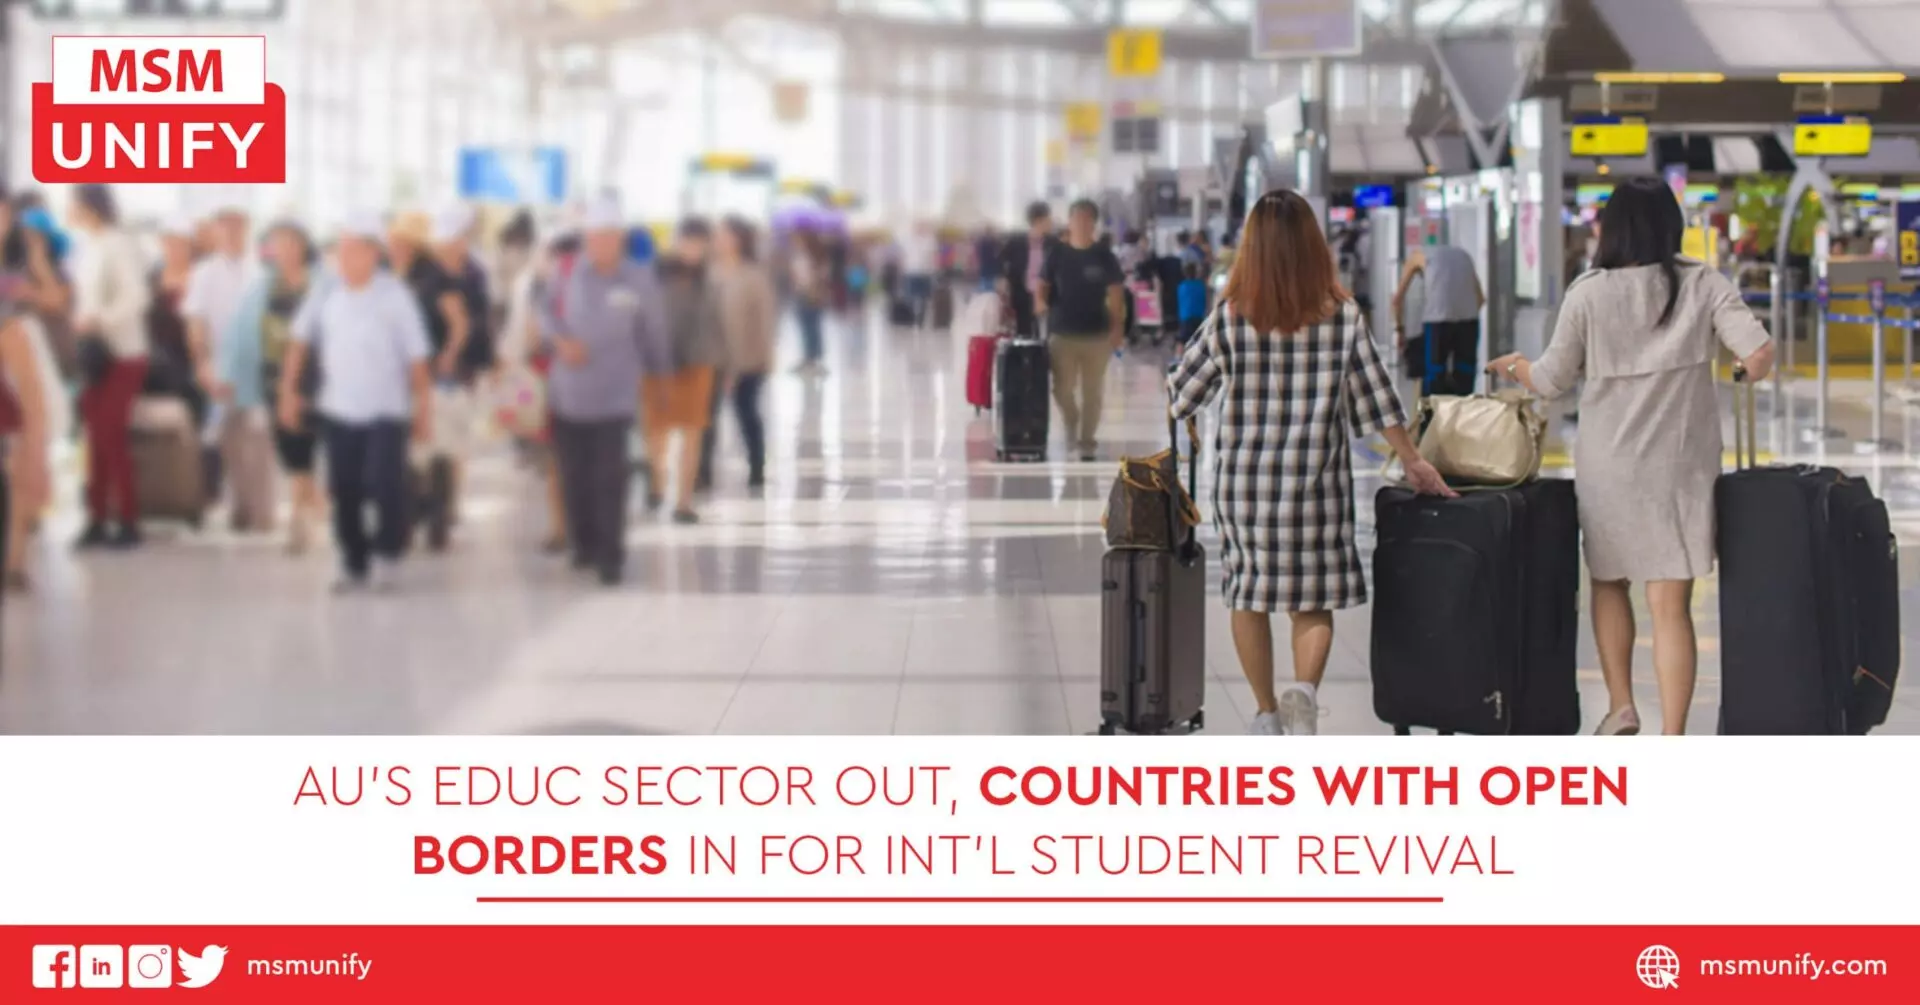 AUs Educ Sector Out Countries With Open Borders In for Intl Student Revival scaled 1